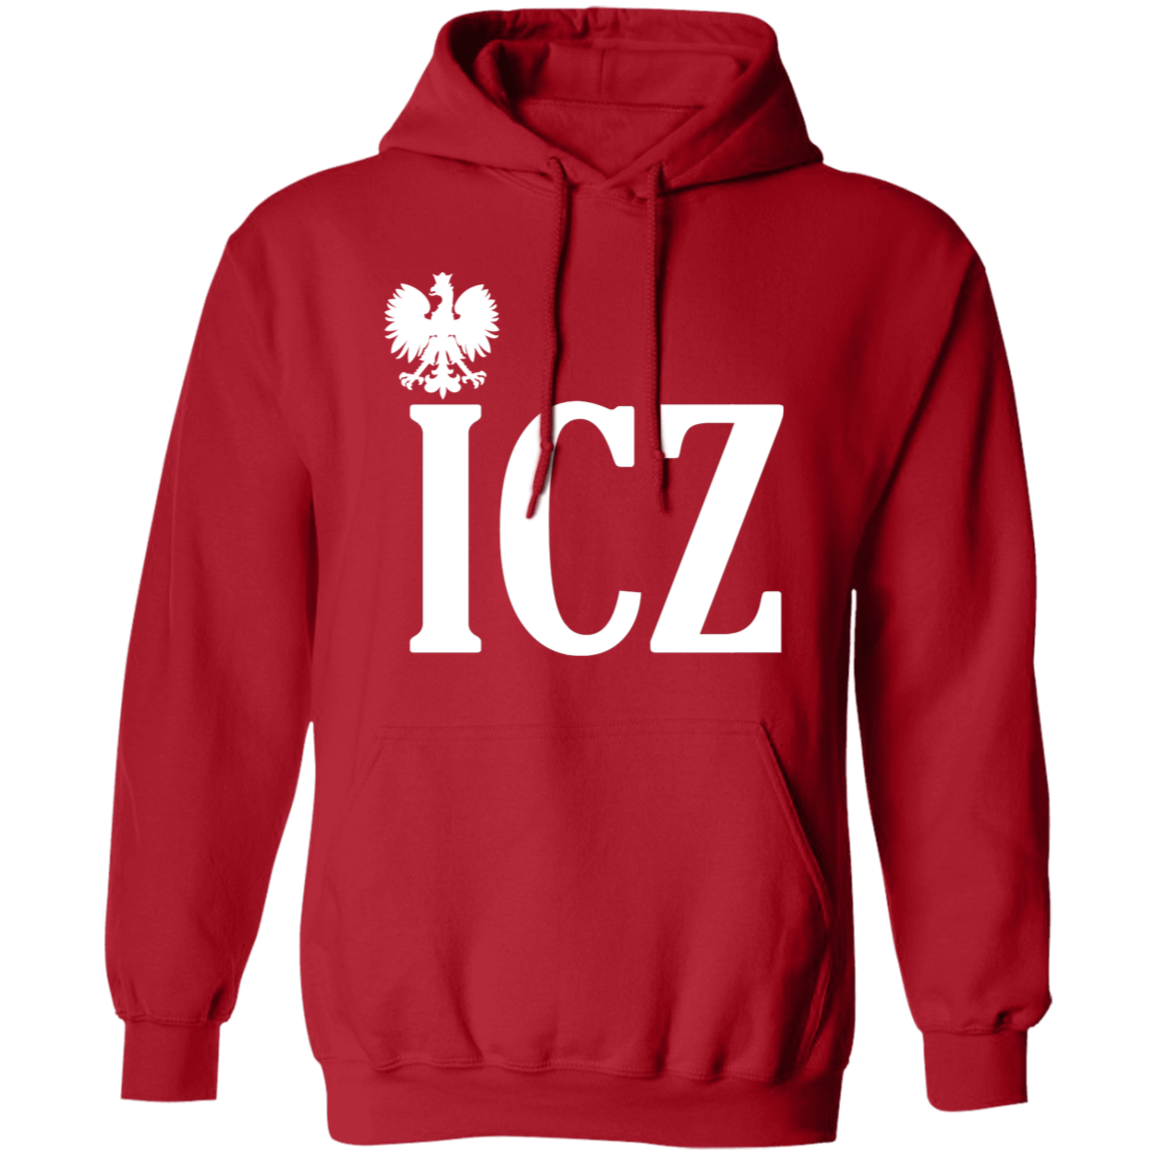 ICZ Polish Surname Ending Apparel CustomCat G185 Pullover Hoodie Red S